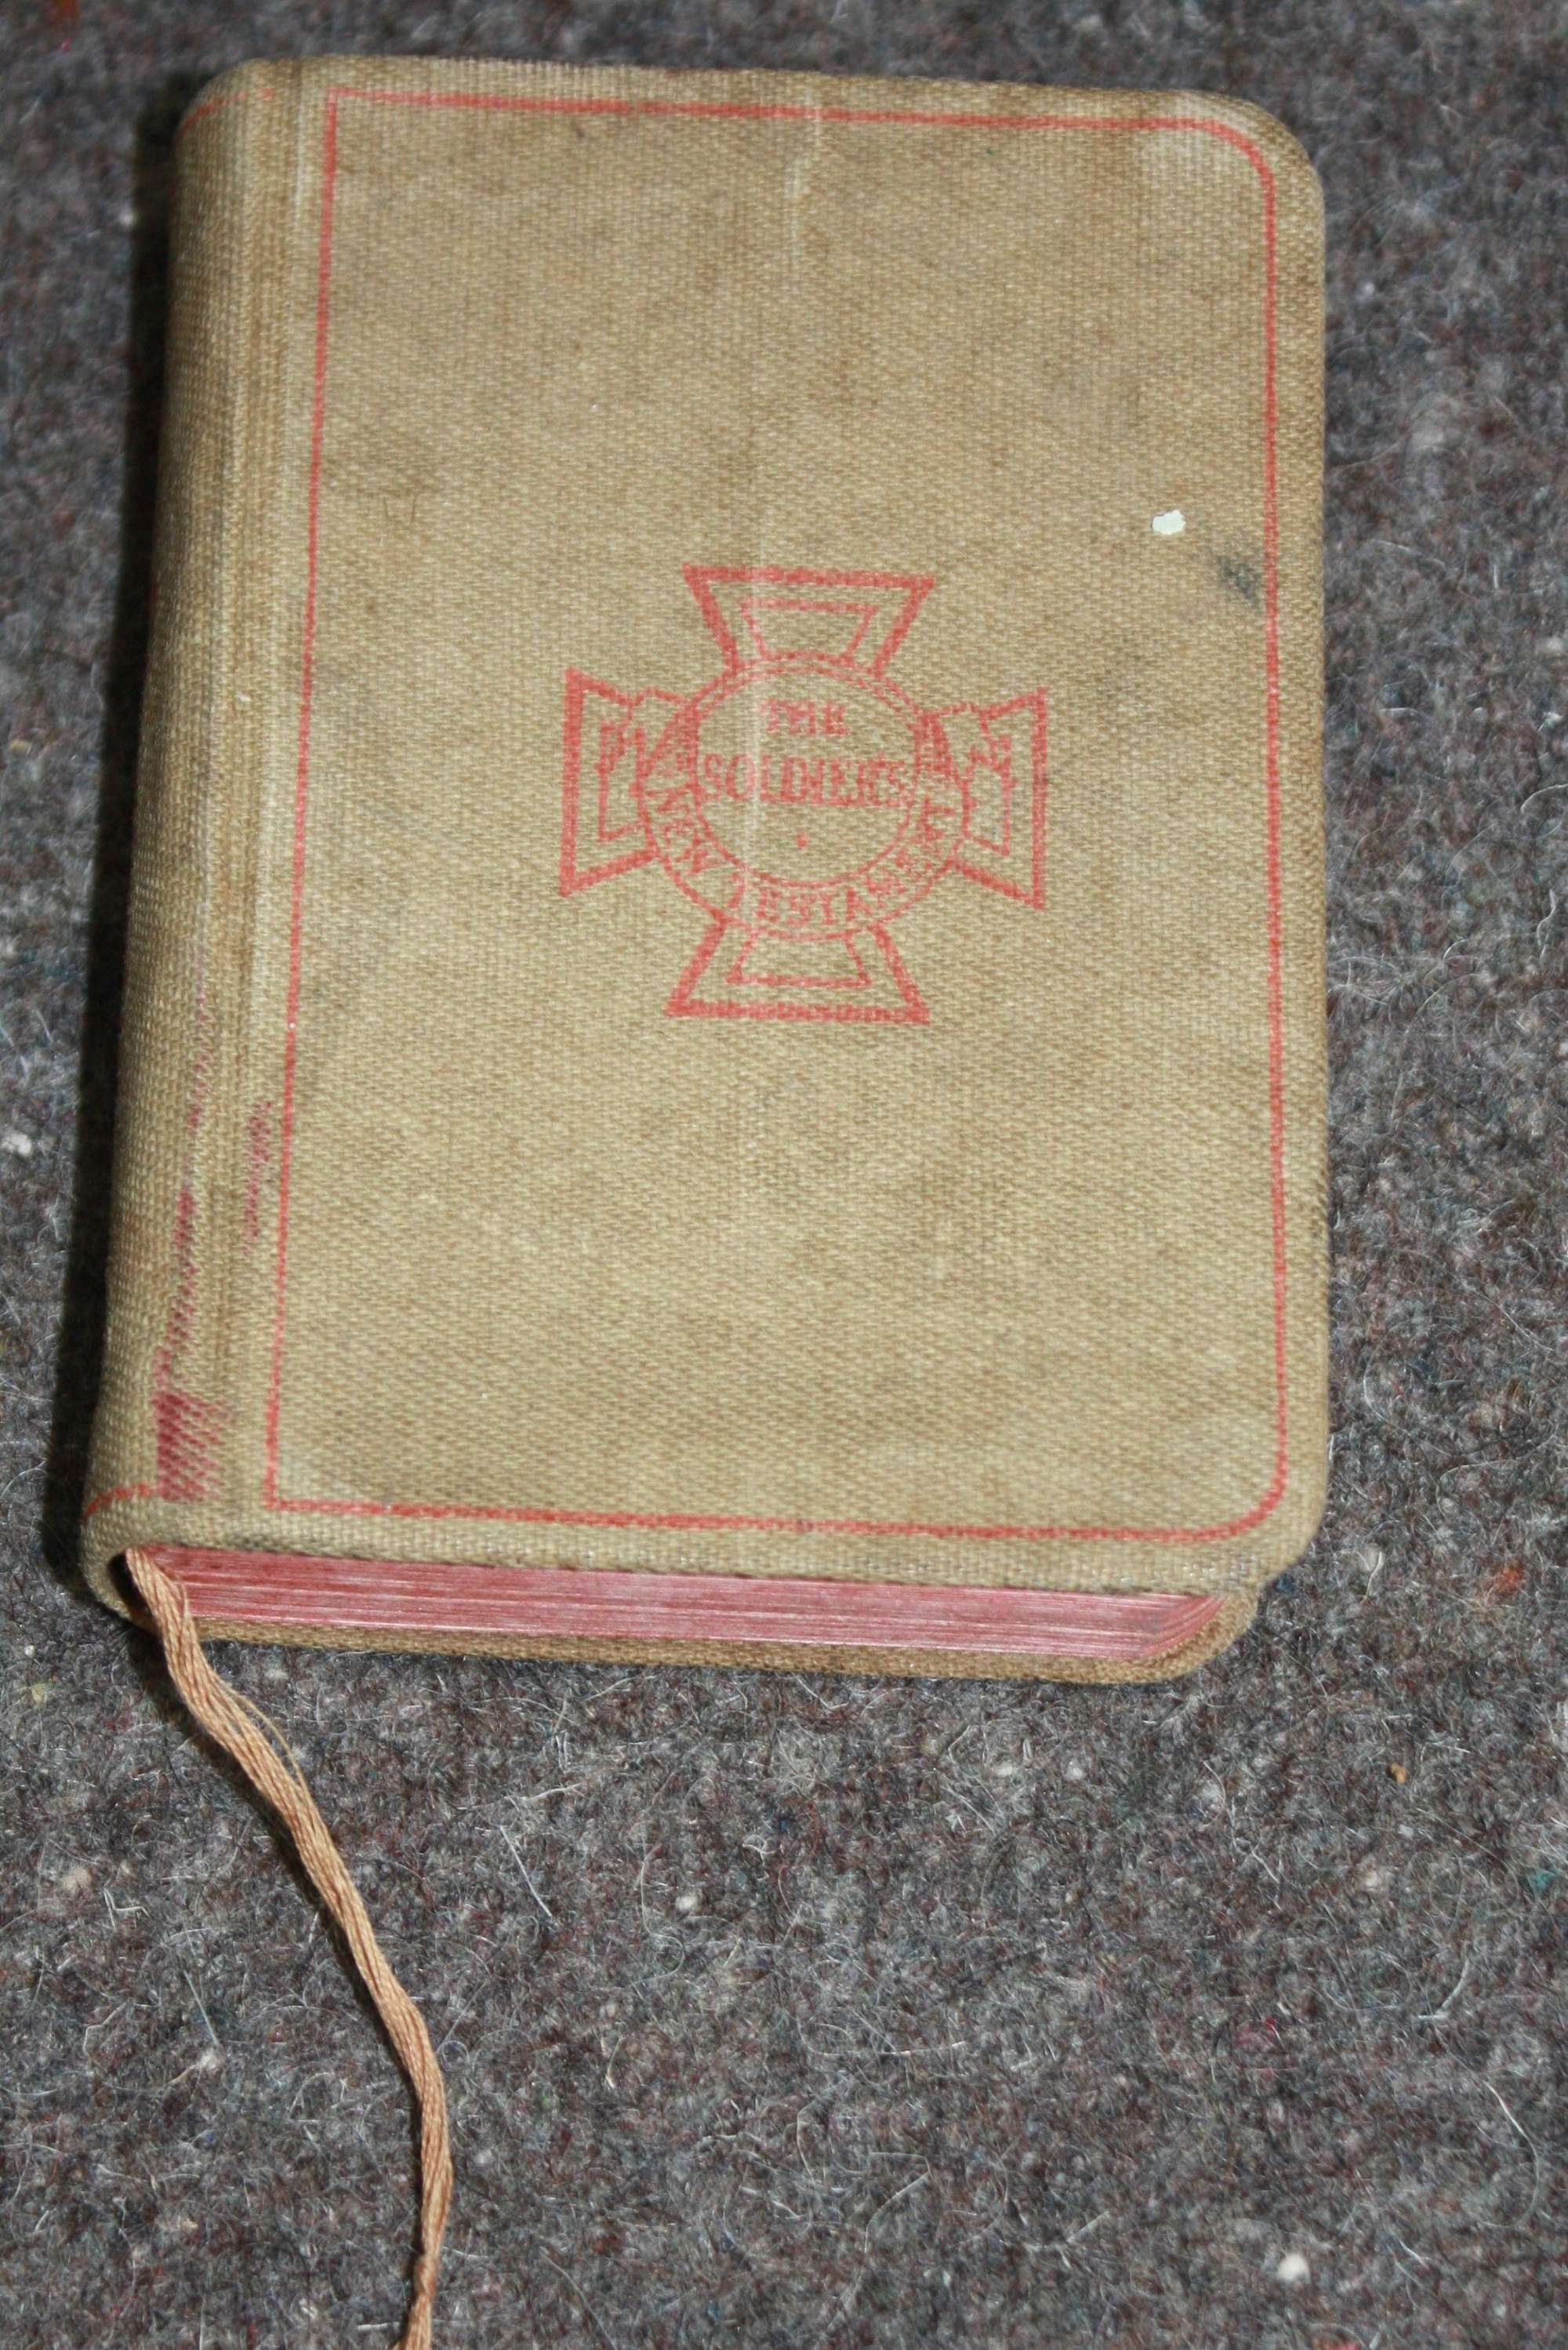 A WWI SOLDIERS NEW TESTAMENT 1914 DATED